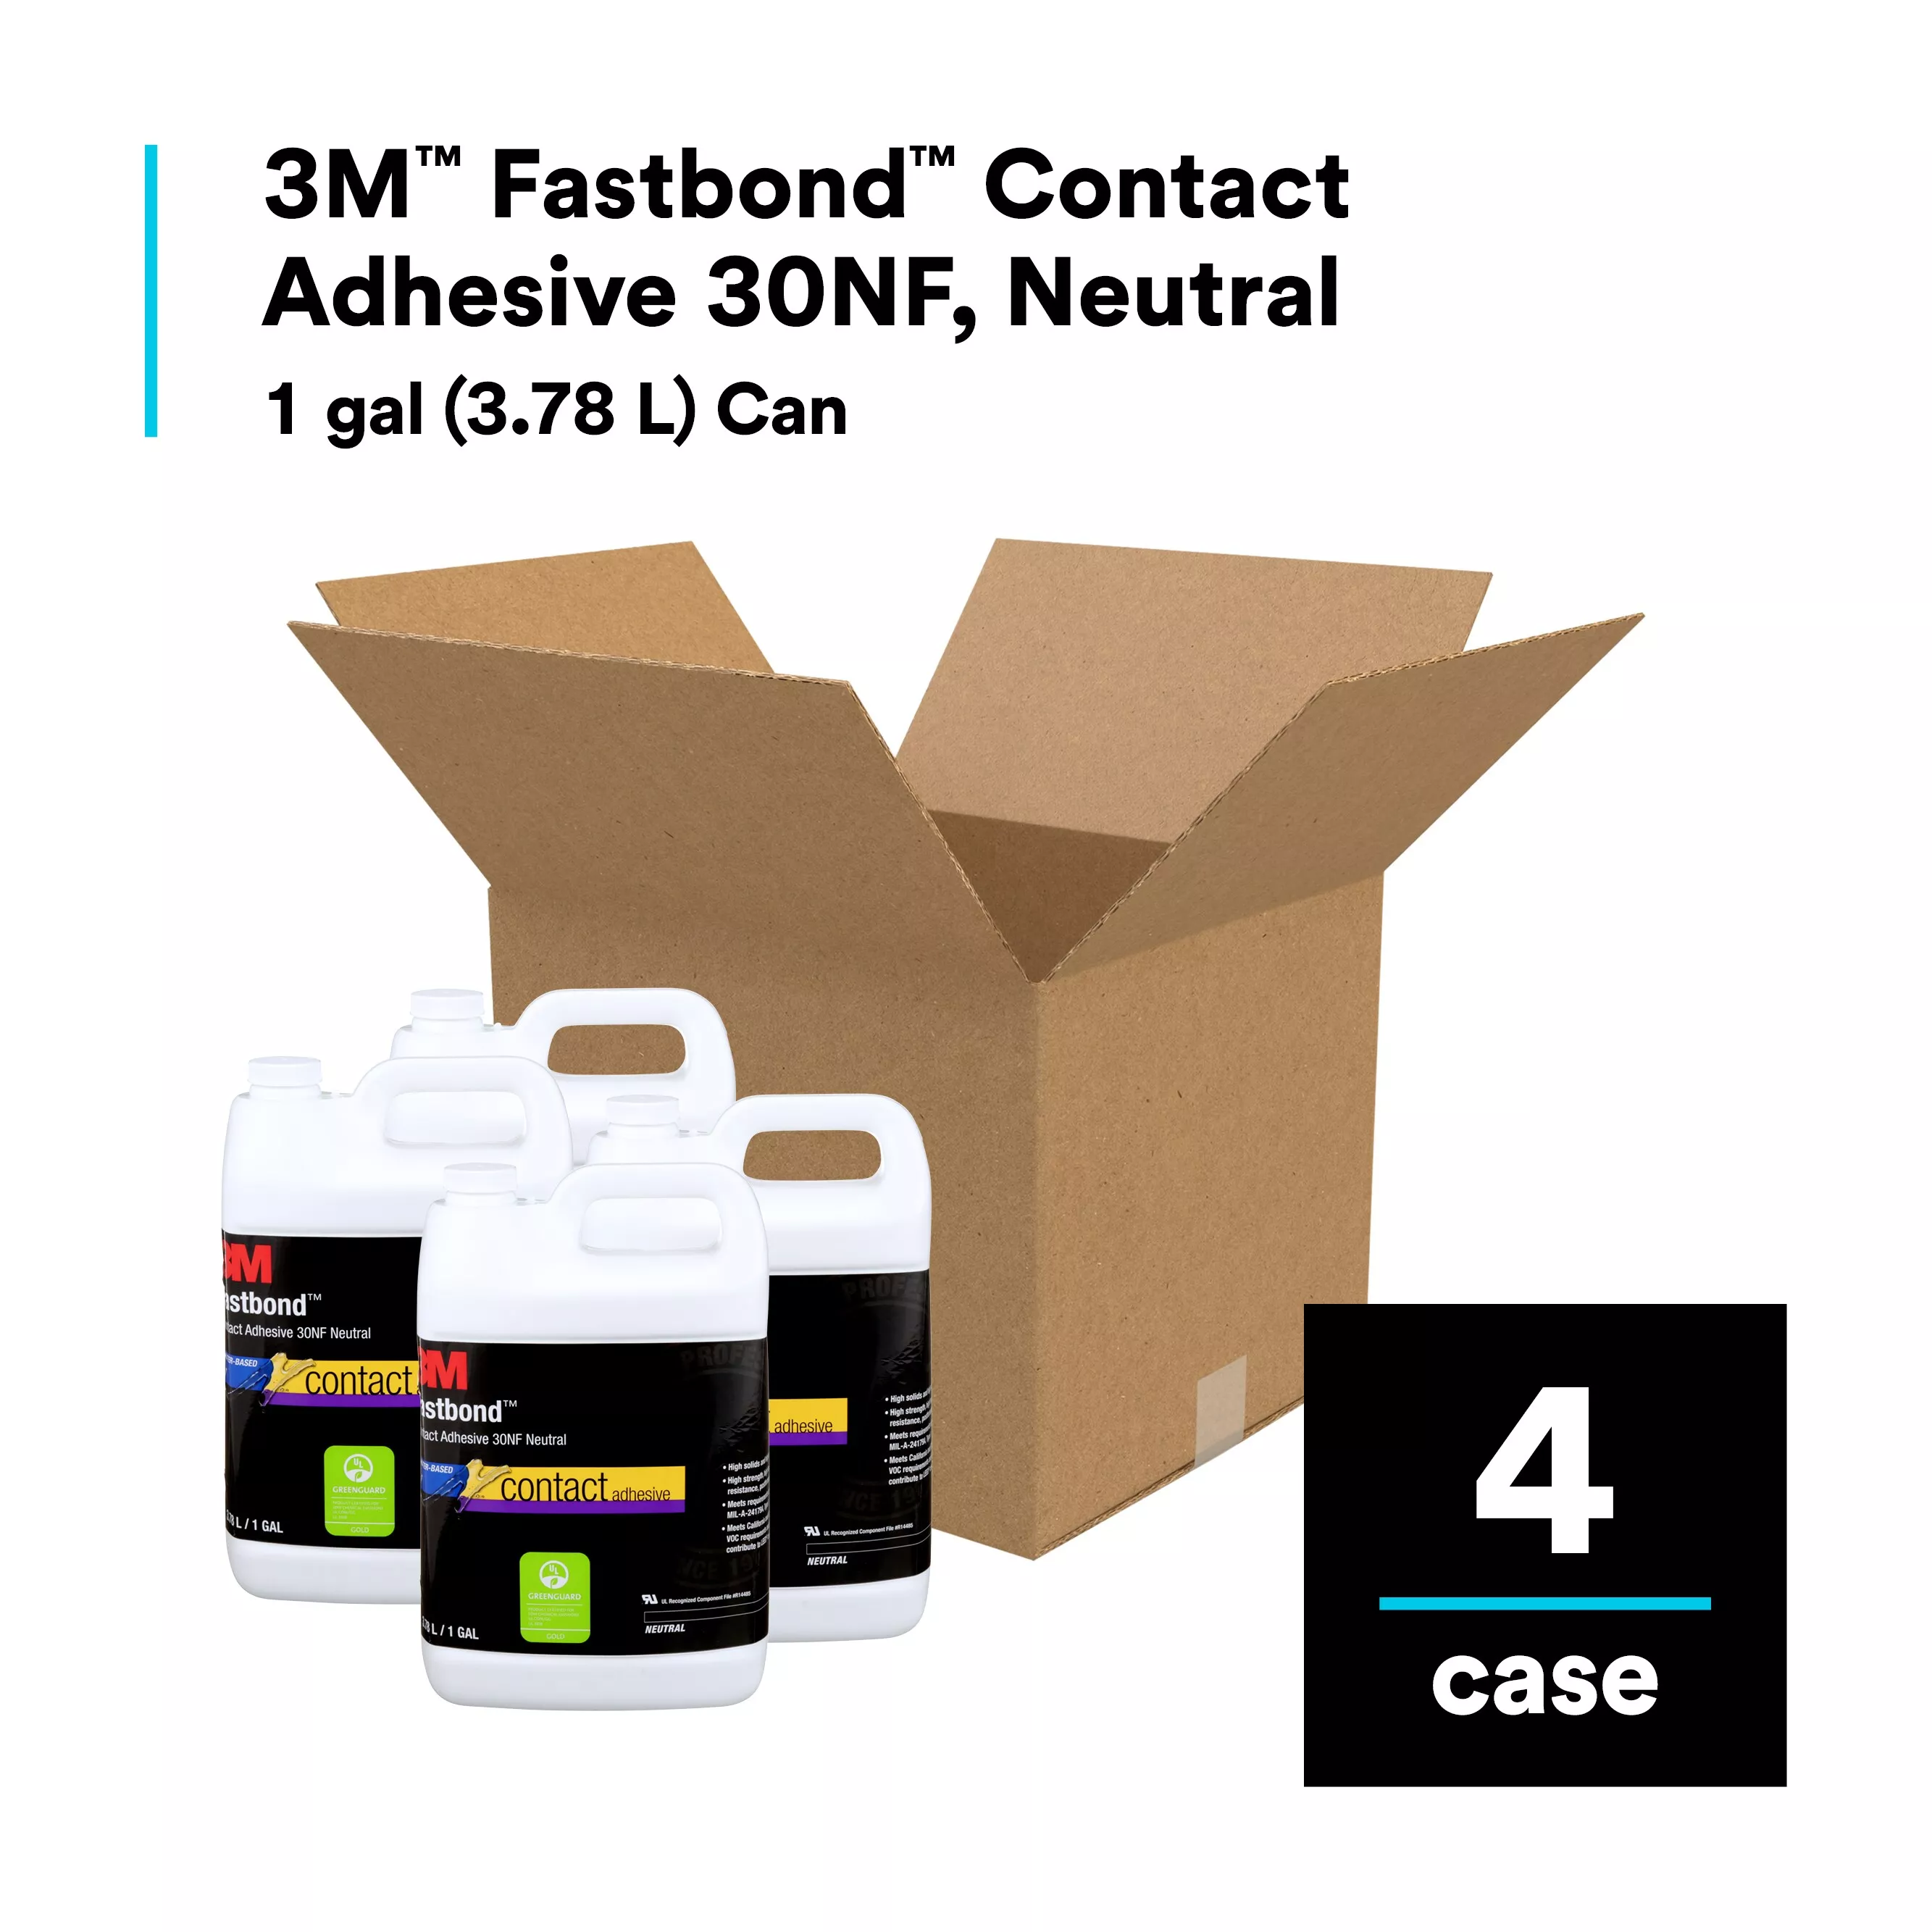 SKU 7000046568 | 3M™ Fastbond™ Contact Adhesive 30NF